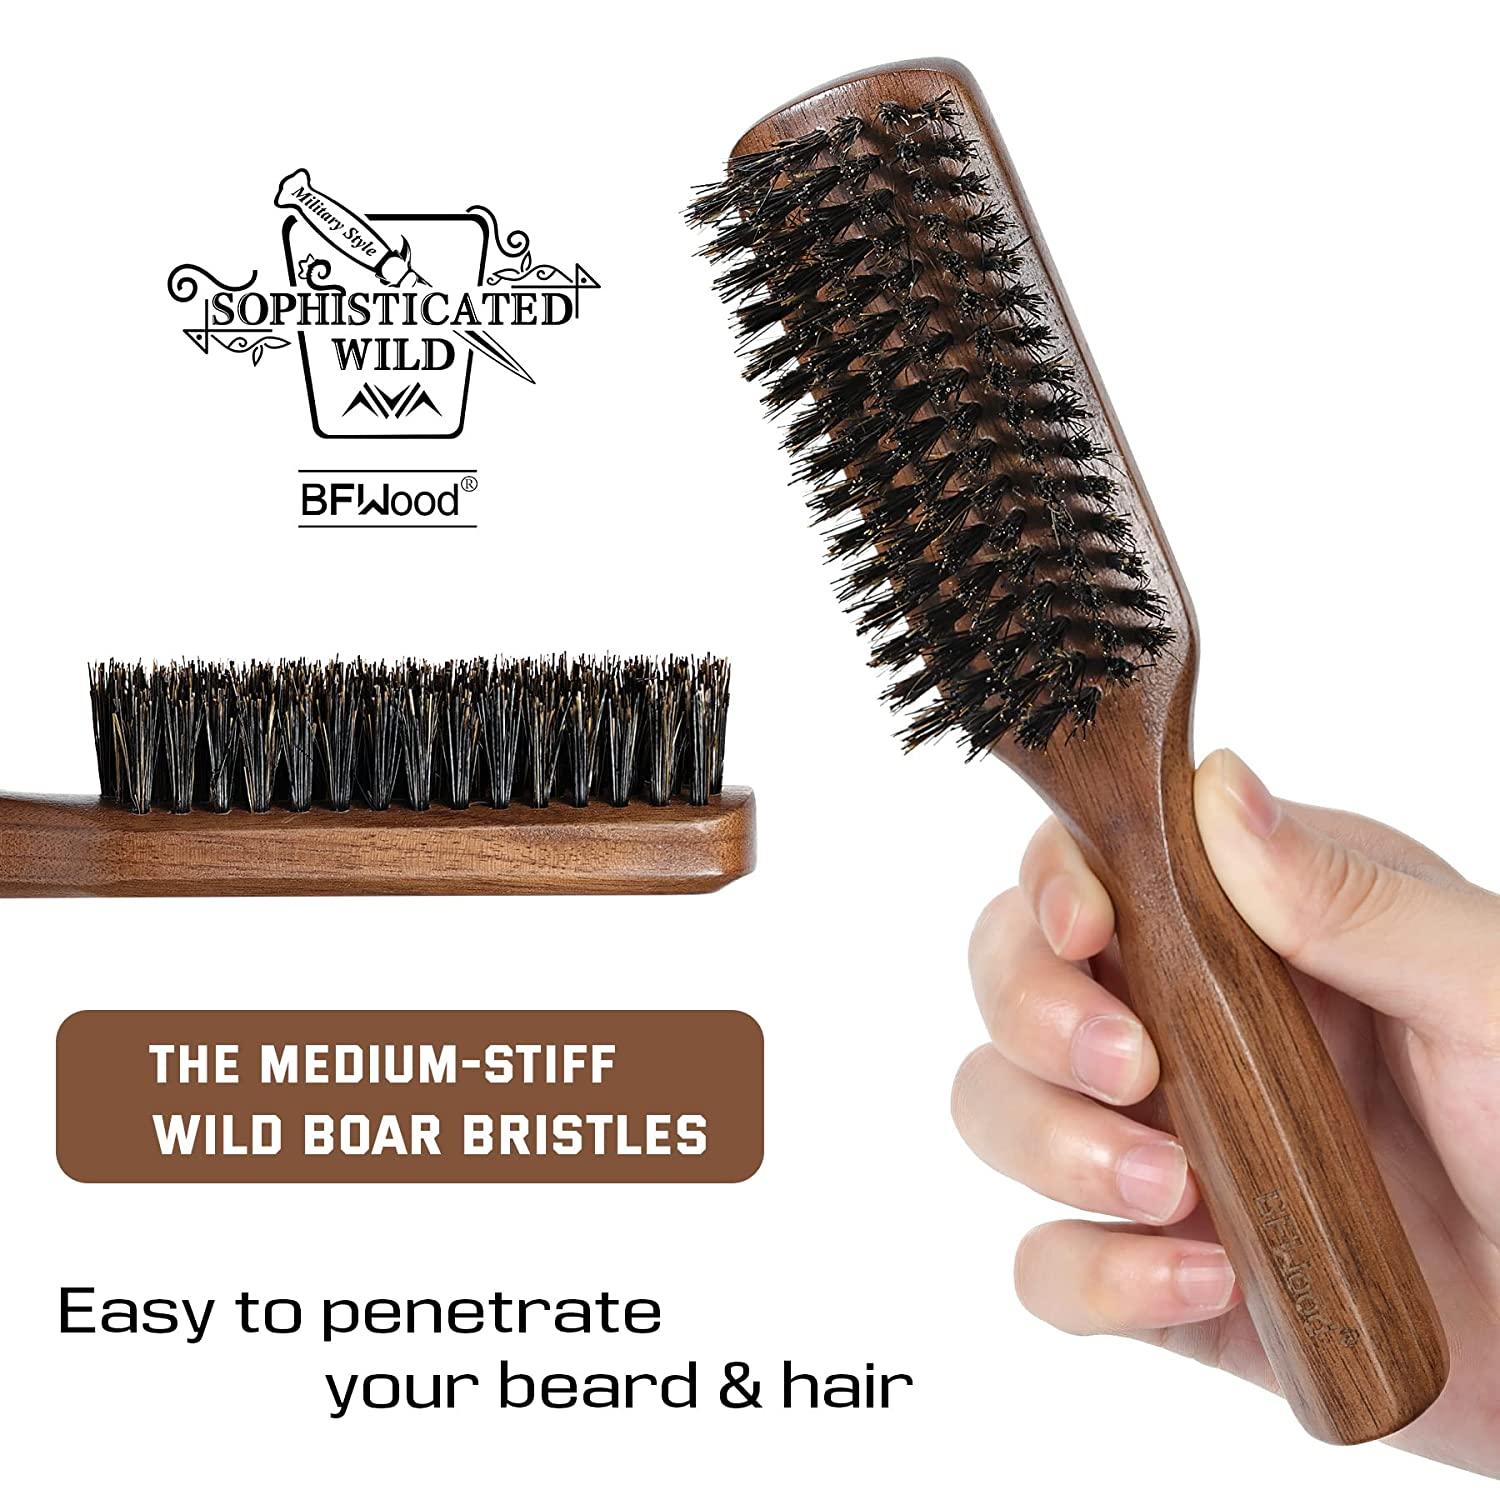 Discounted Pure 1st Cut Boar Bristle and Pearwood Hairbrush made